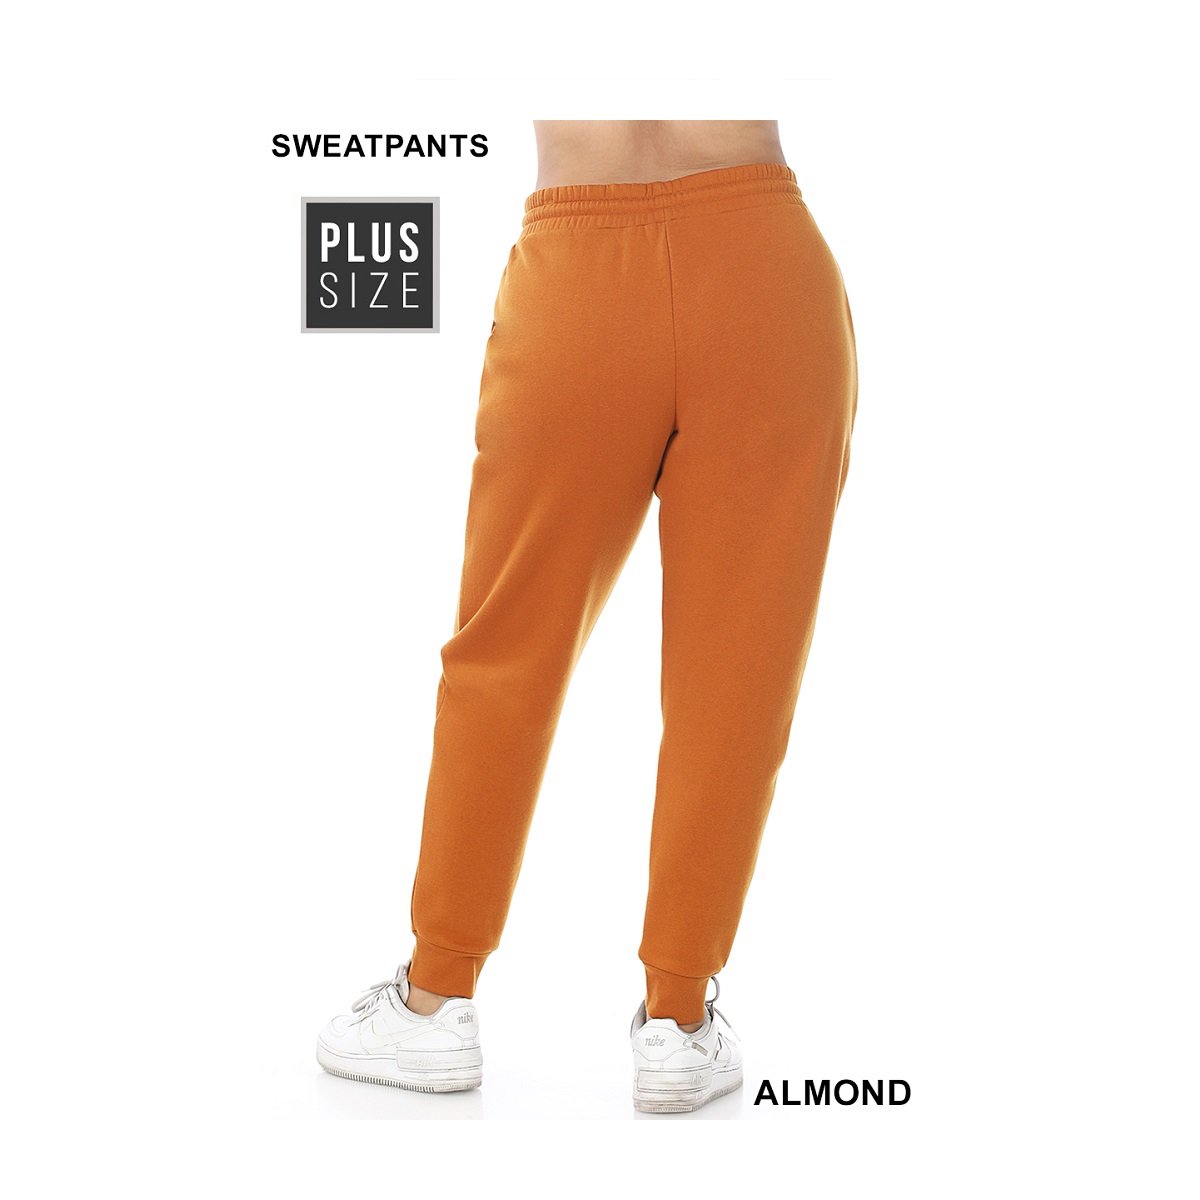 Women's Plus Size Sweatpants with pockets,  Elastic Waistband with Draw String,